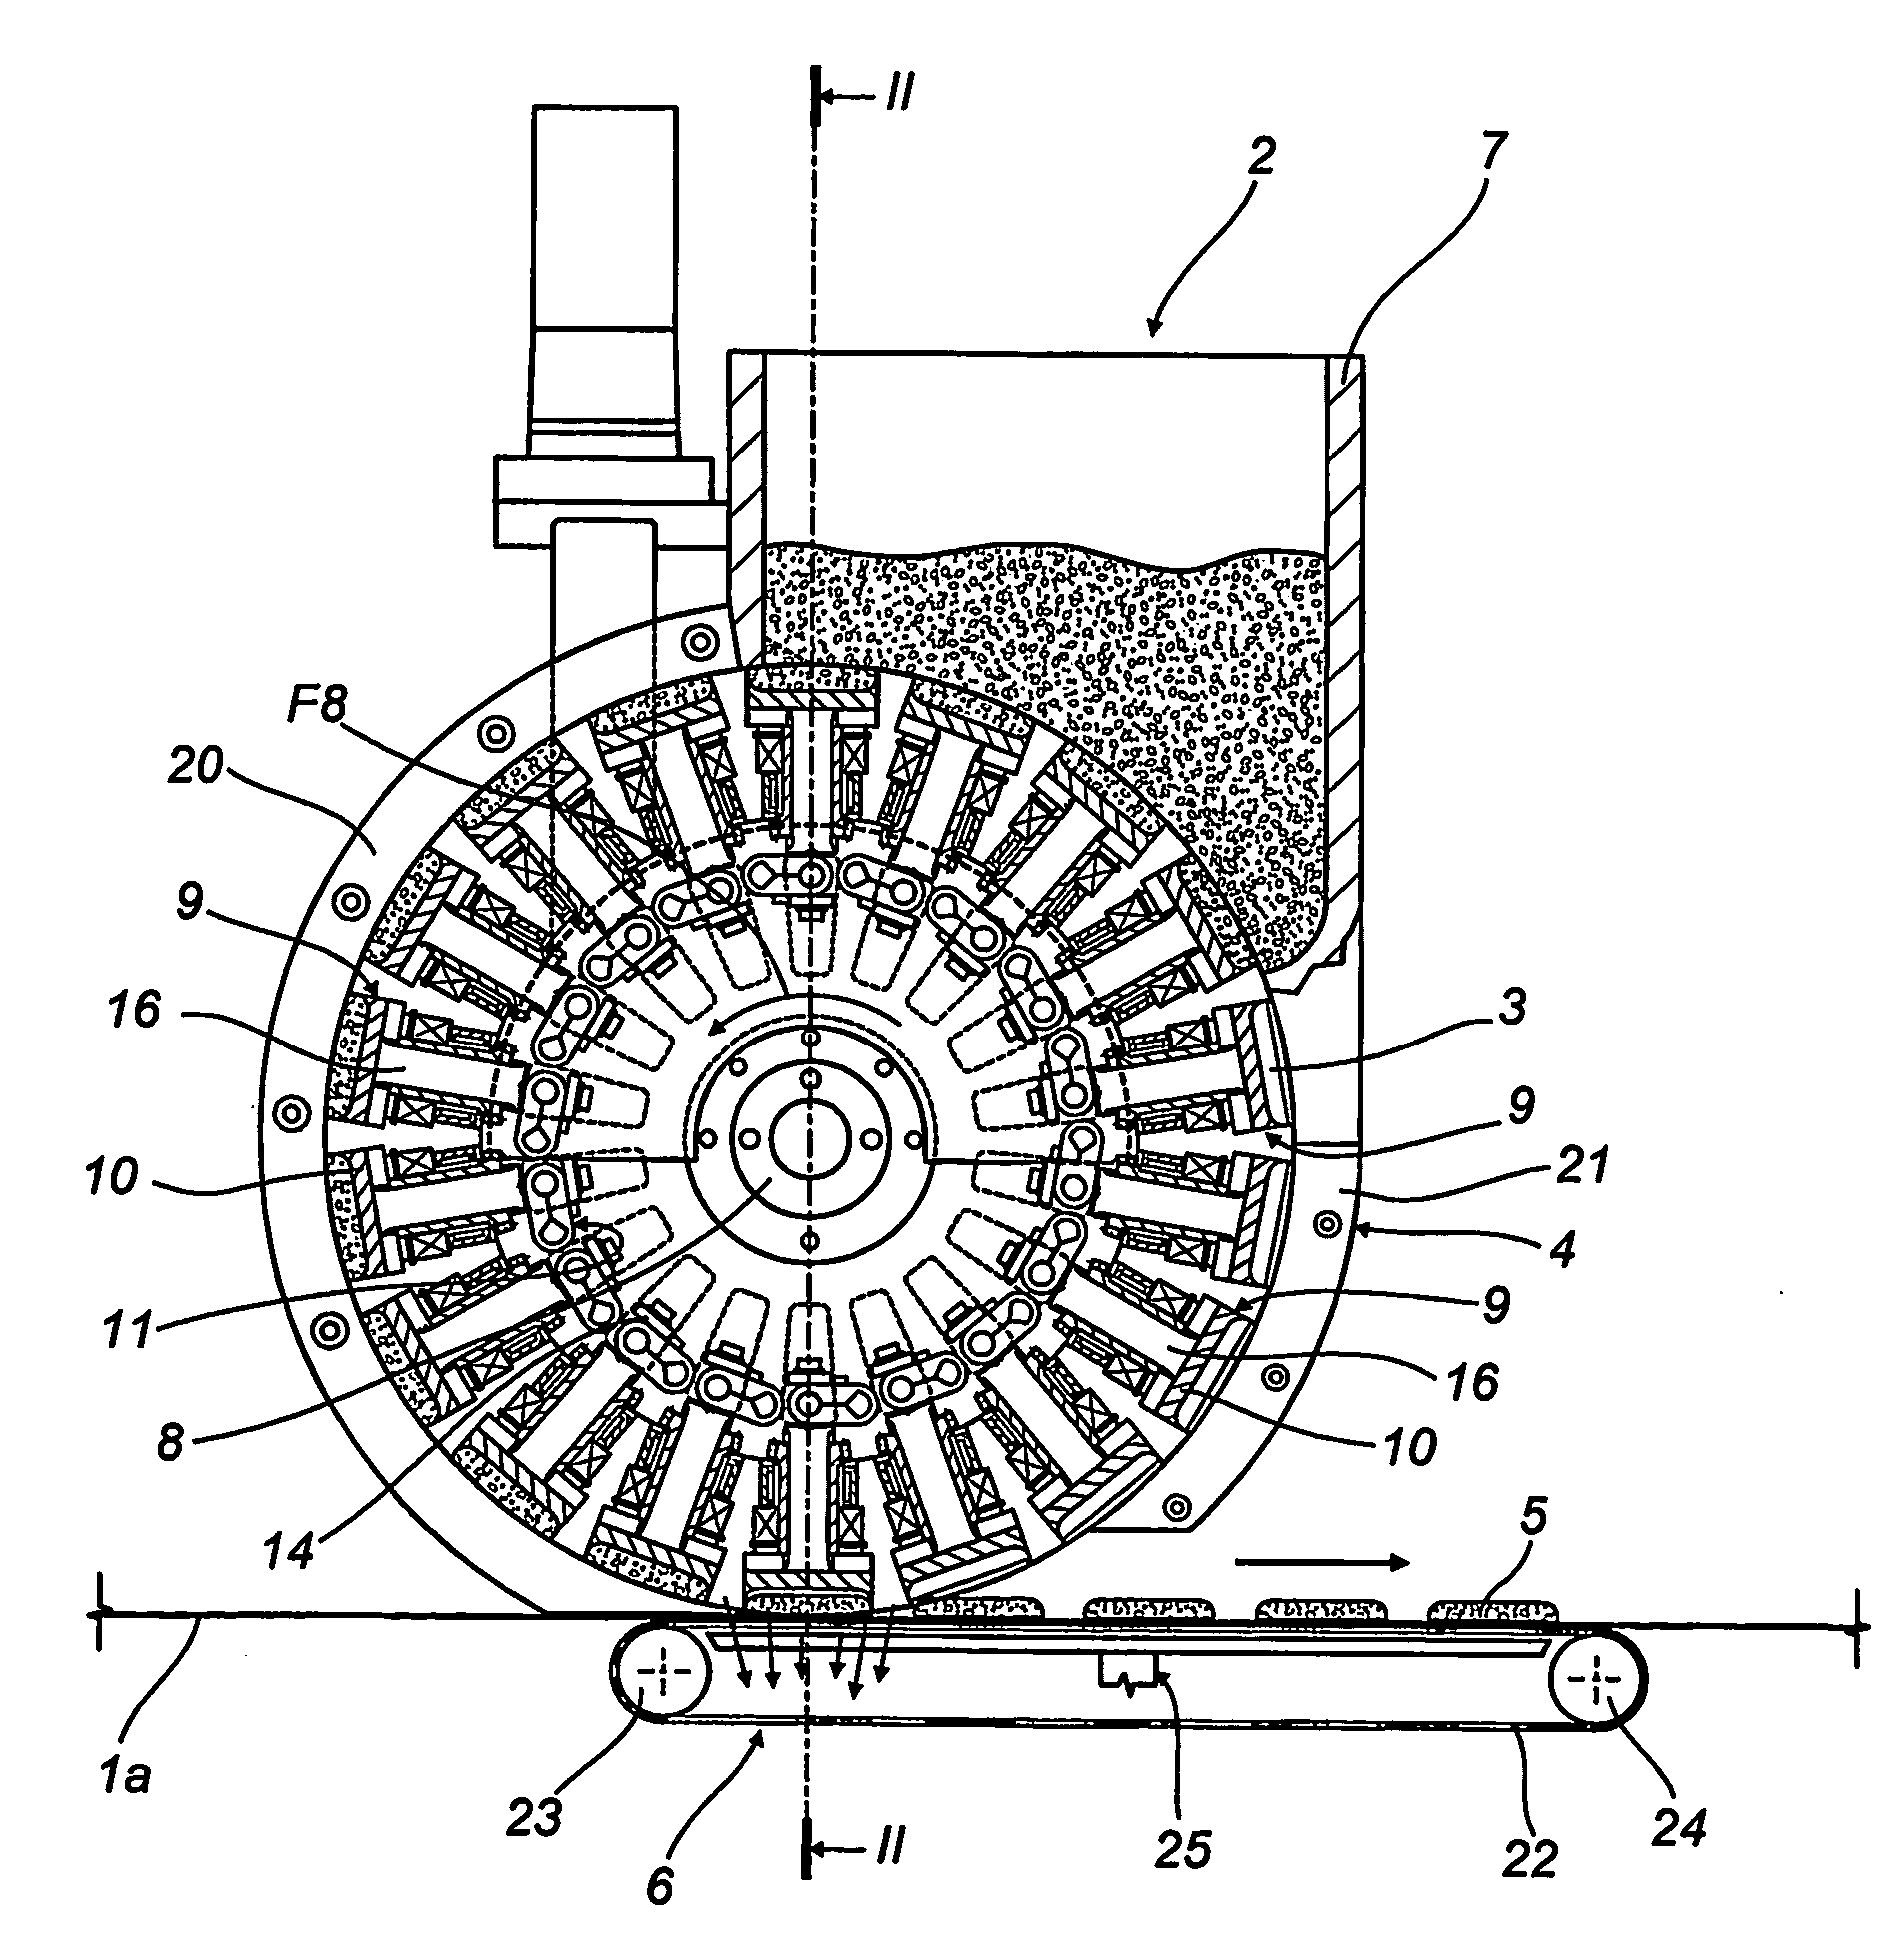 Device for dosing and forming pods for products for infusion